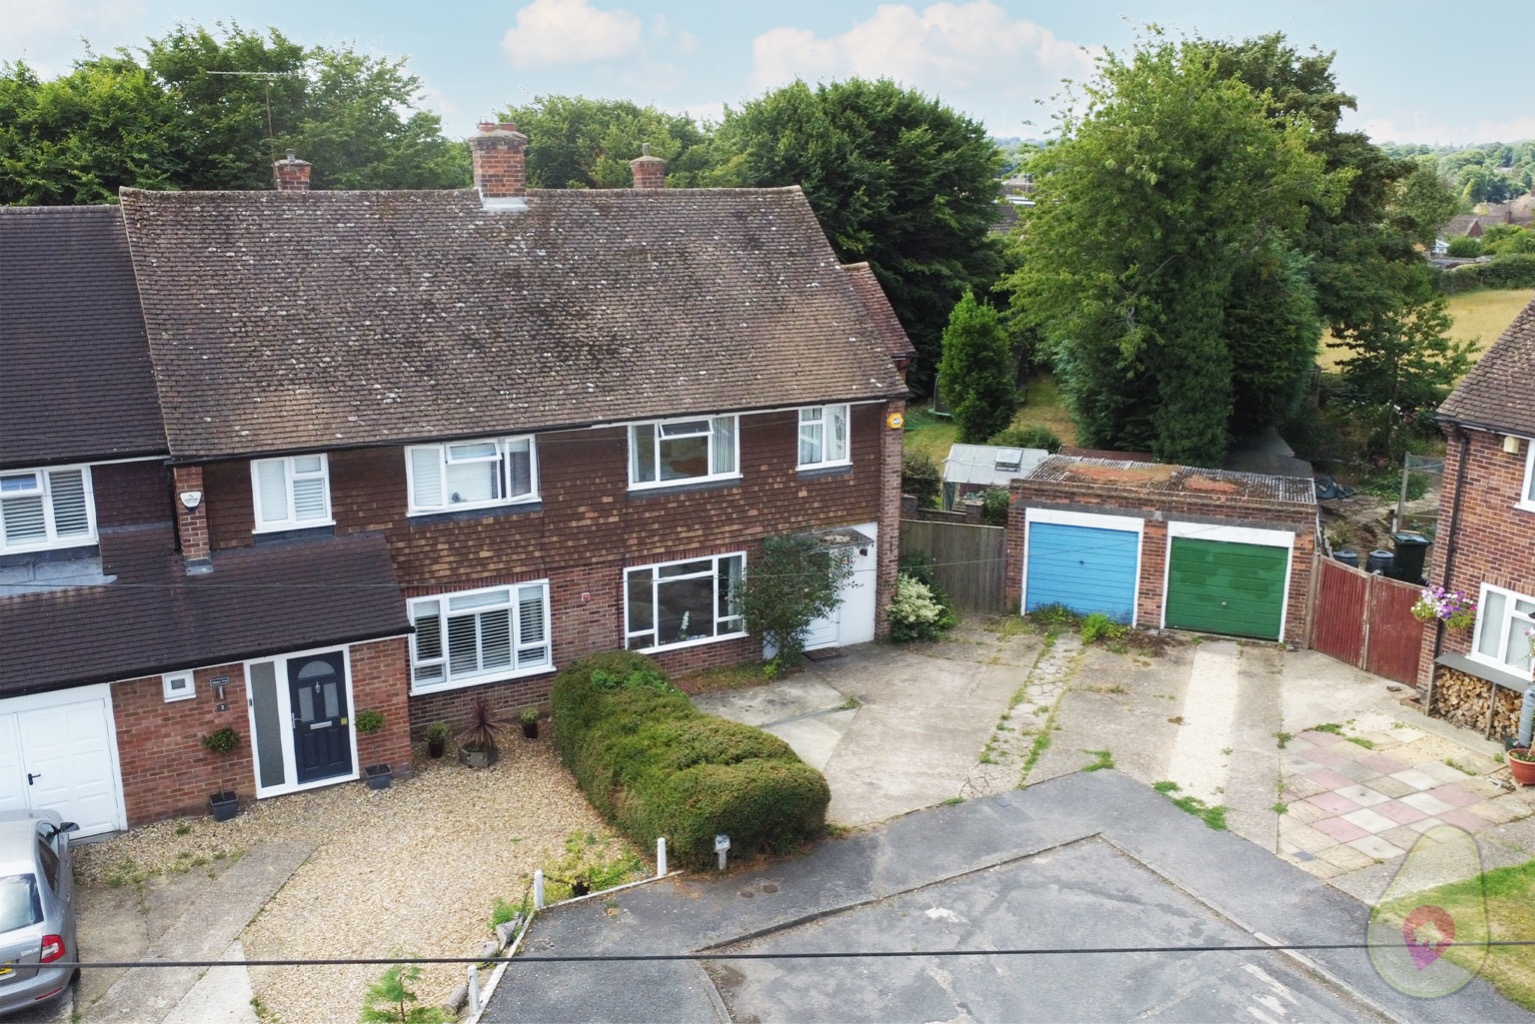 4 bed semi-detached house for sale in Heath Close, High Wycombe, HP15